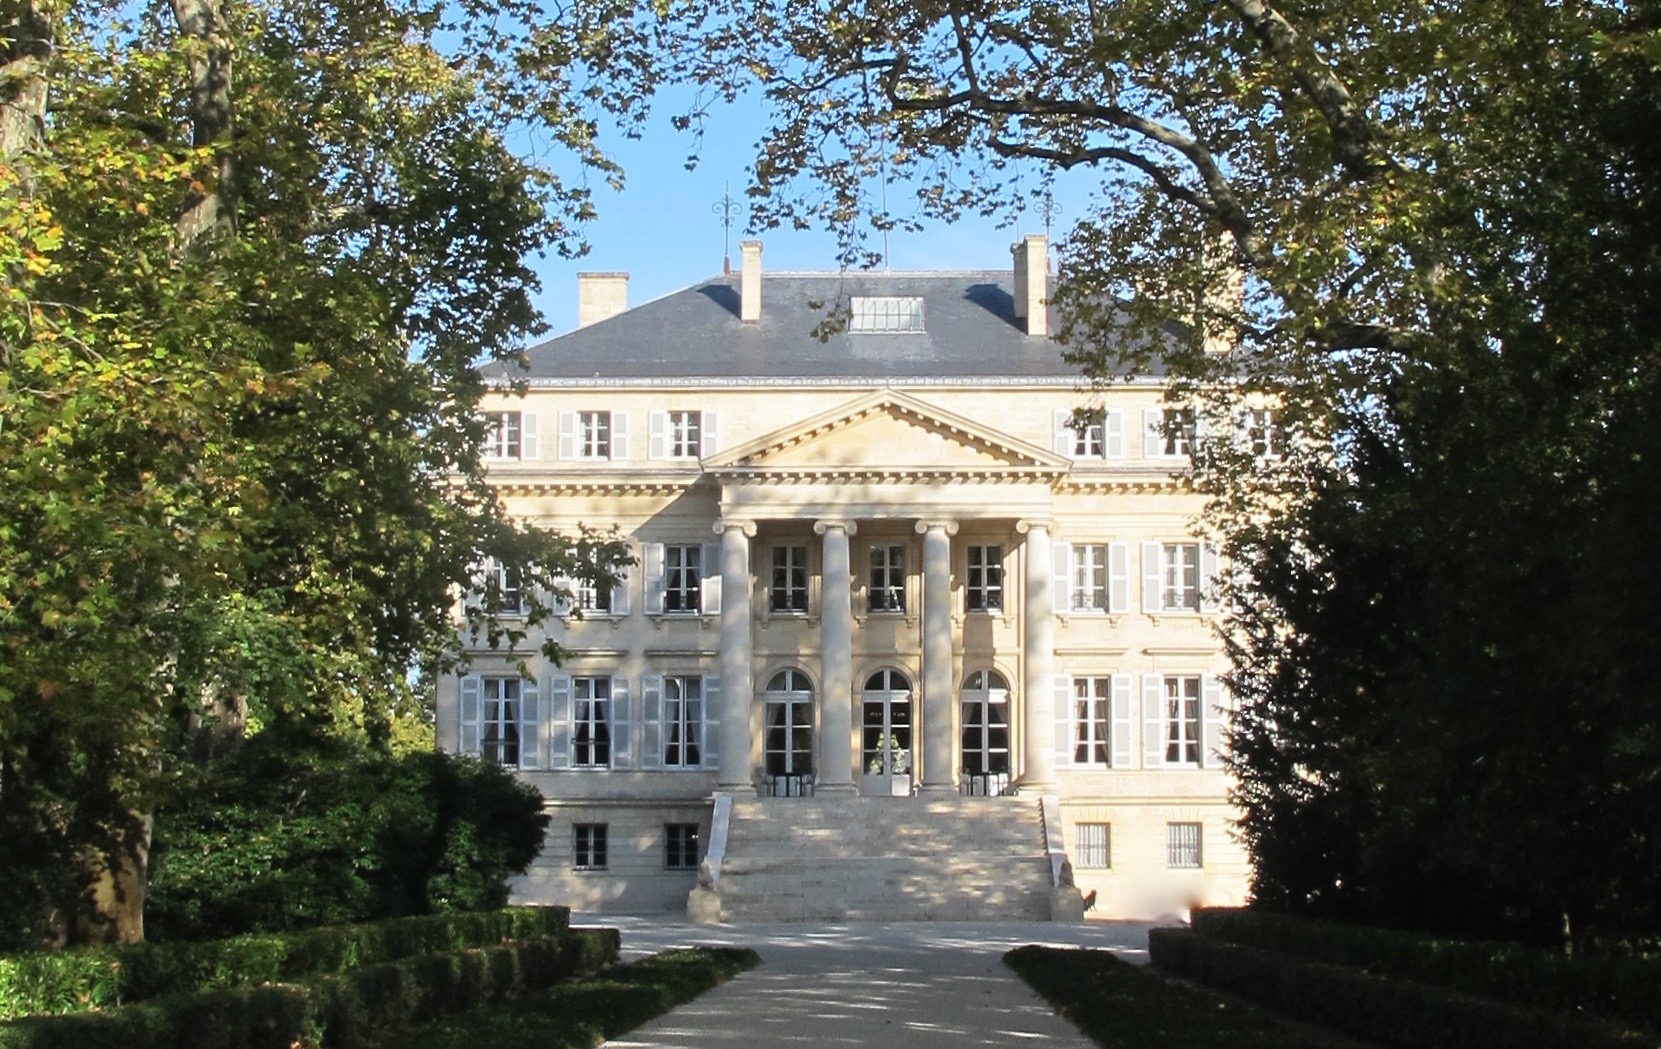 Château Margaux, often called the Versailles of the Médoc. Photo by Marla Norman.